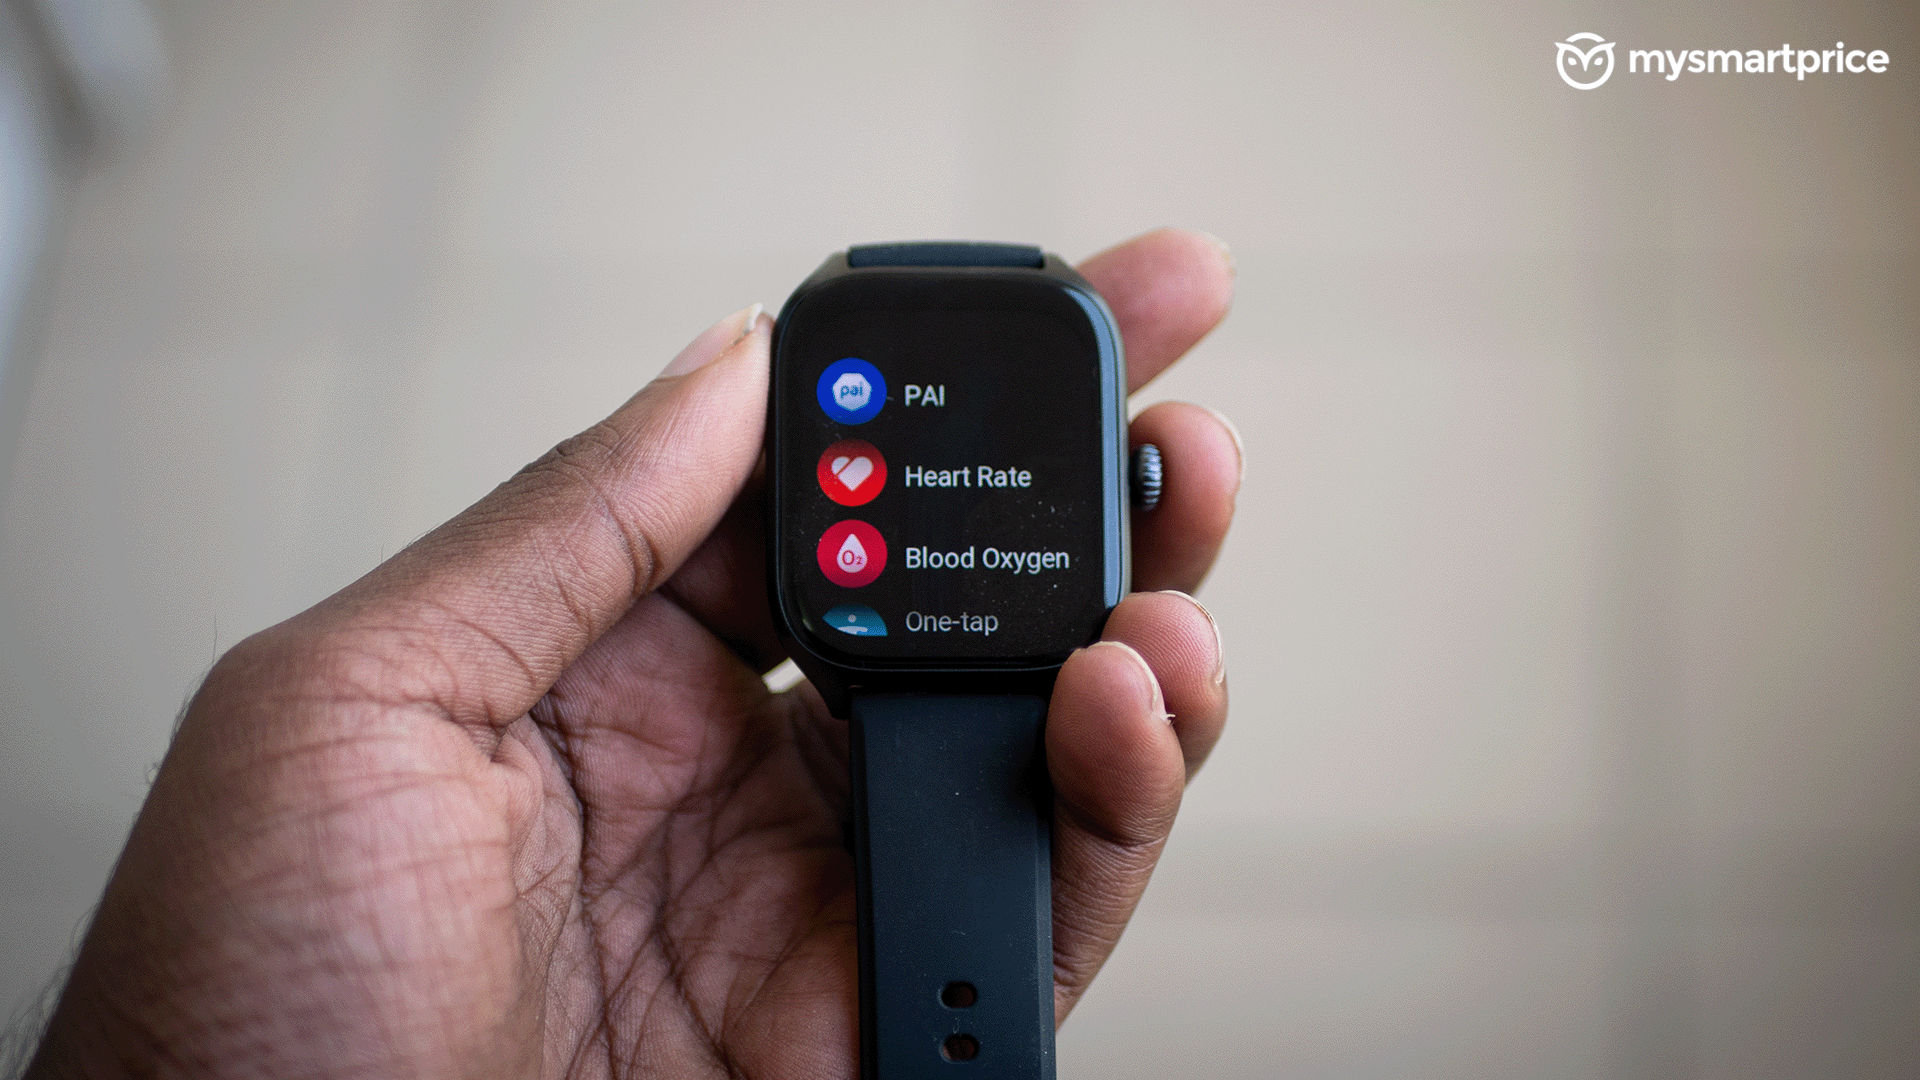 Amazfit GTS 4 Review: A Reliable Smartwatch - MySmartPrice